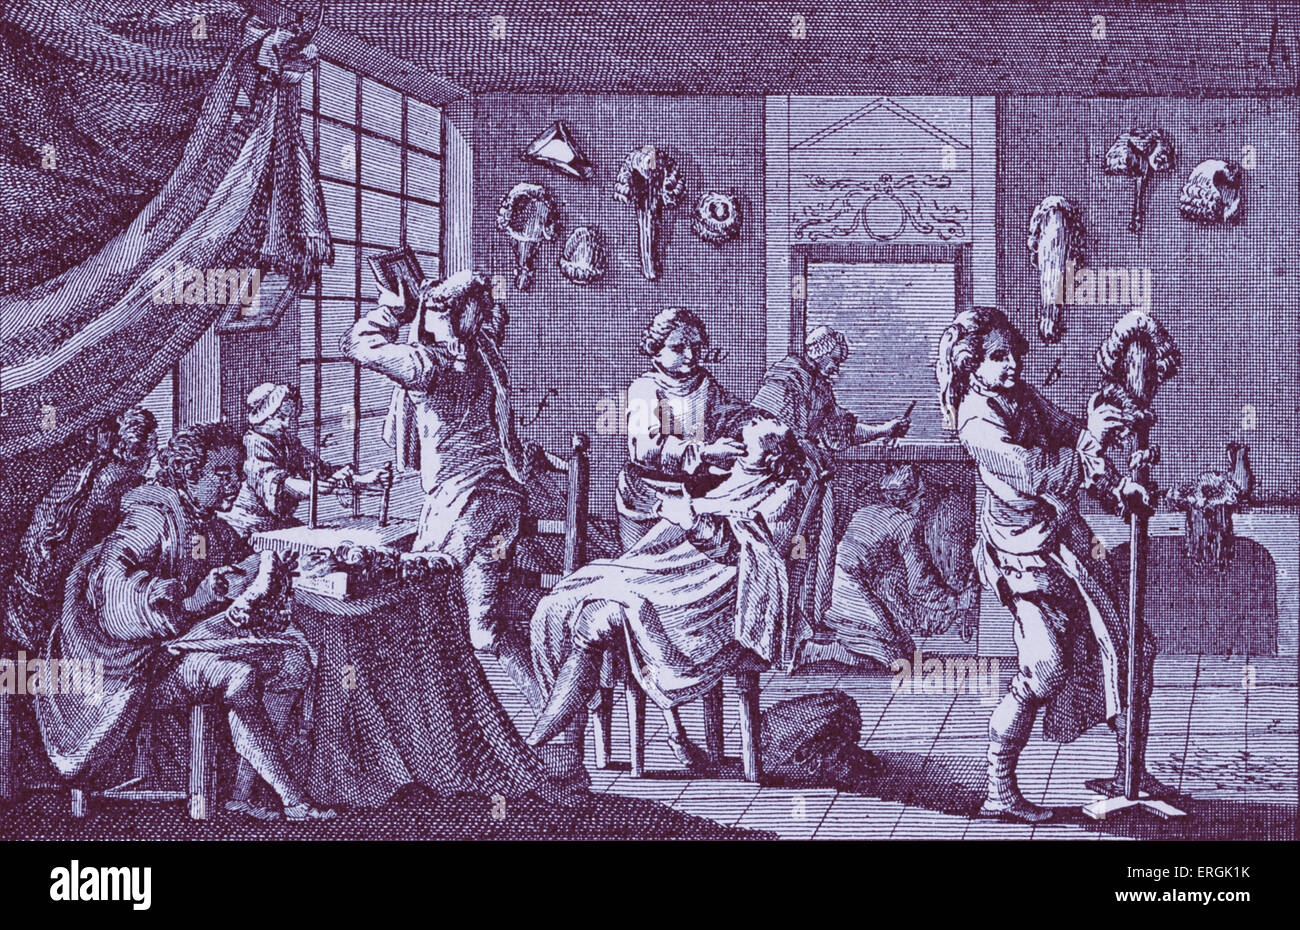 Perruquier's Shop, England, 18th century. Illustration of maker of perukes or wigs. Stock Photo